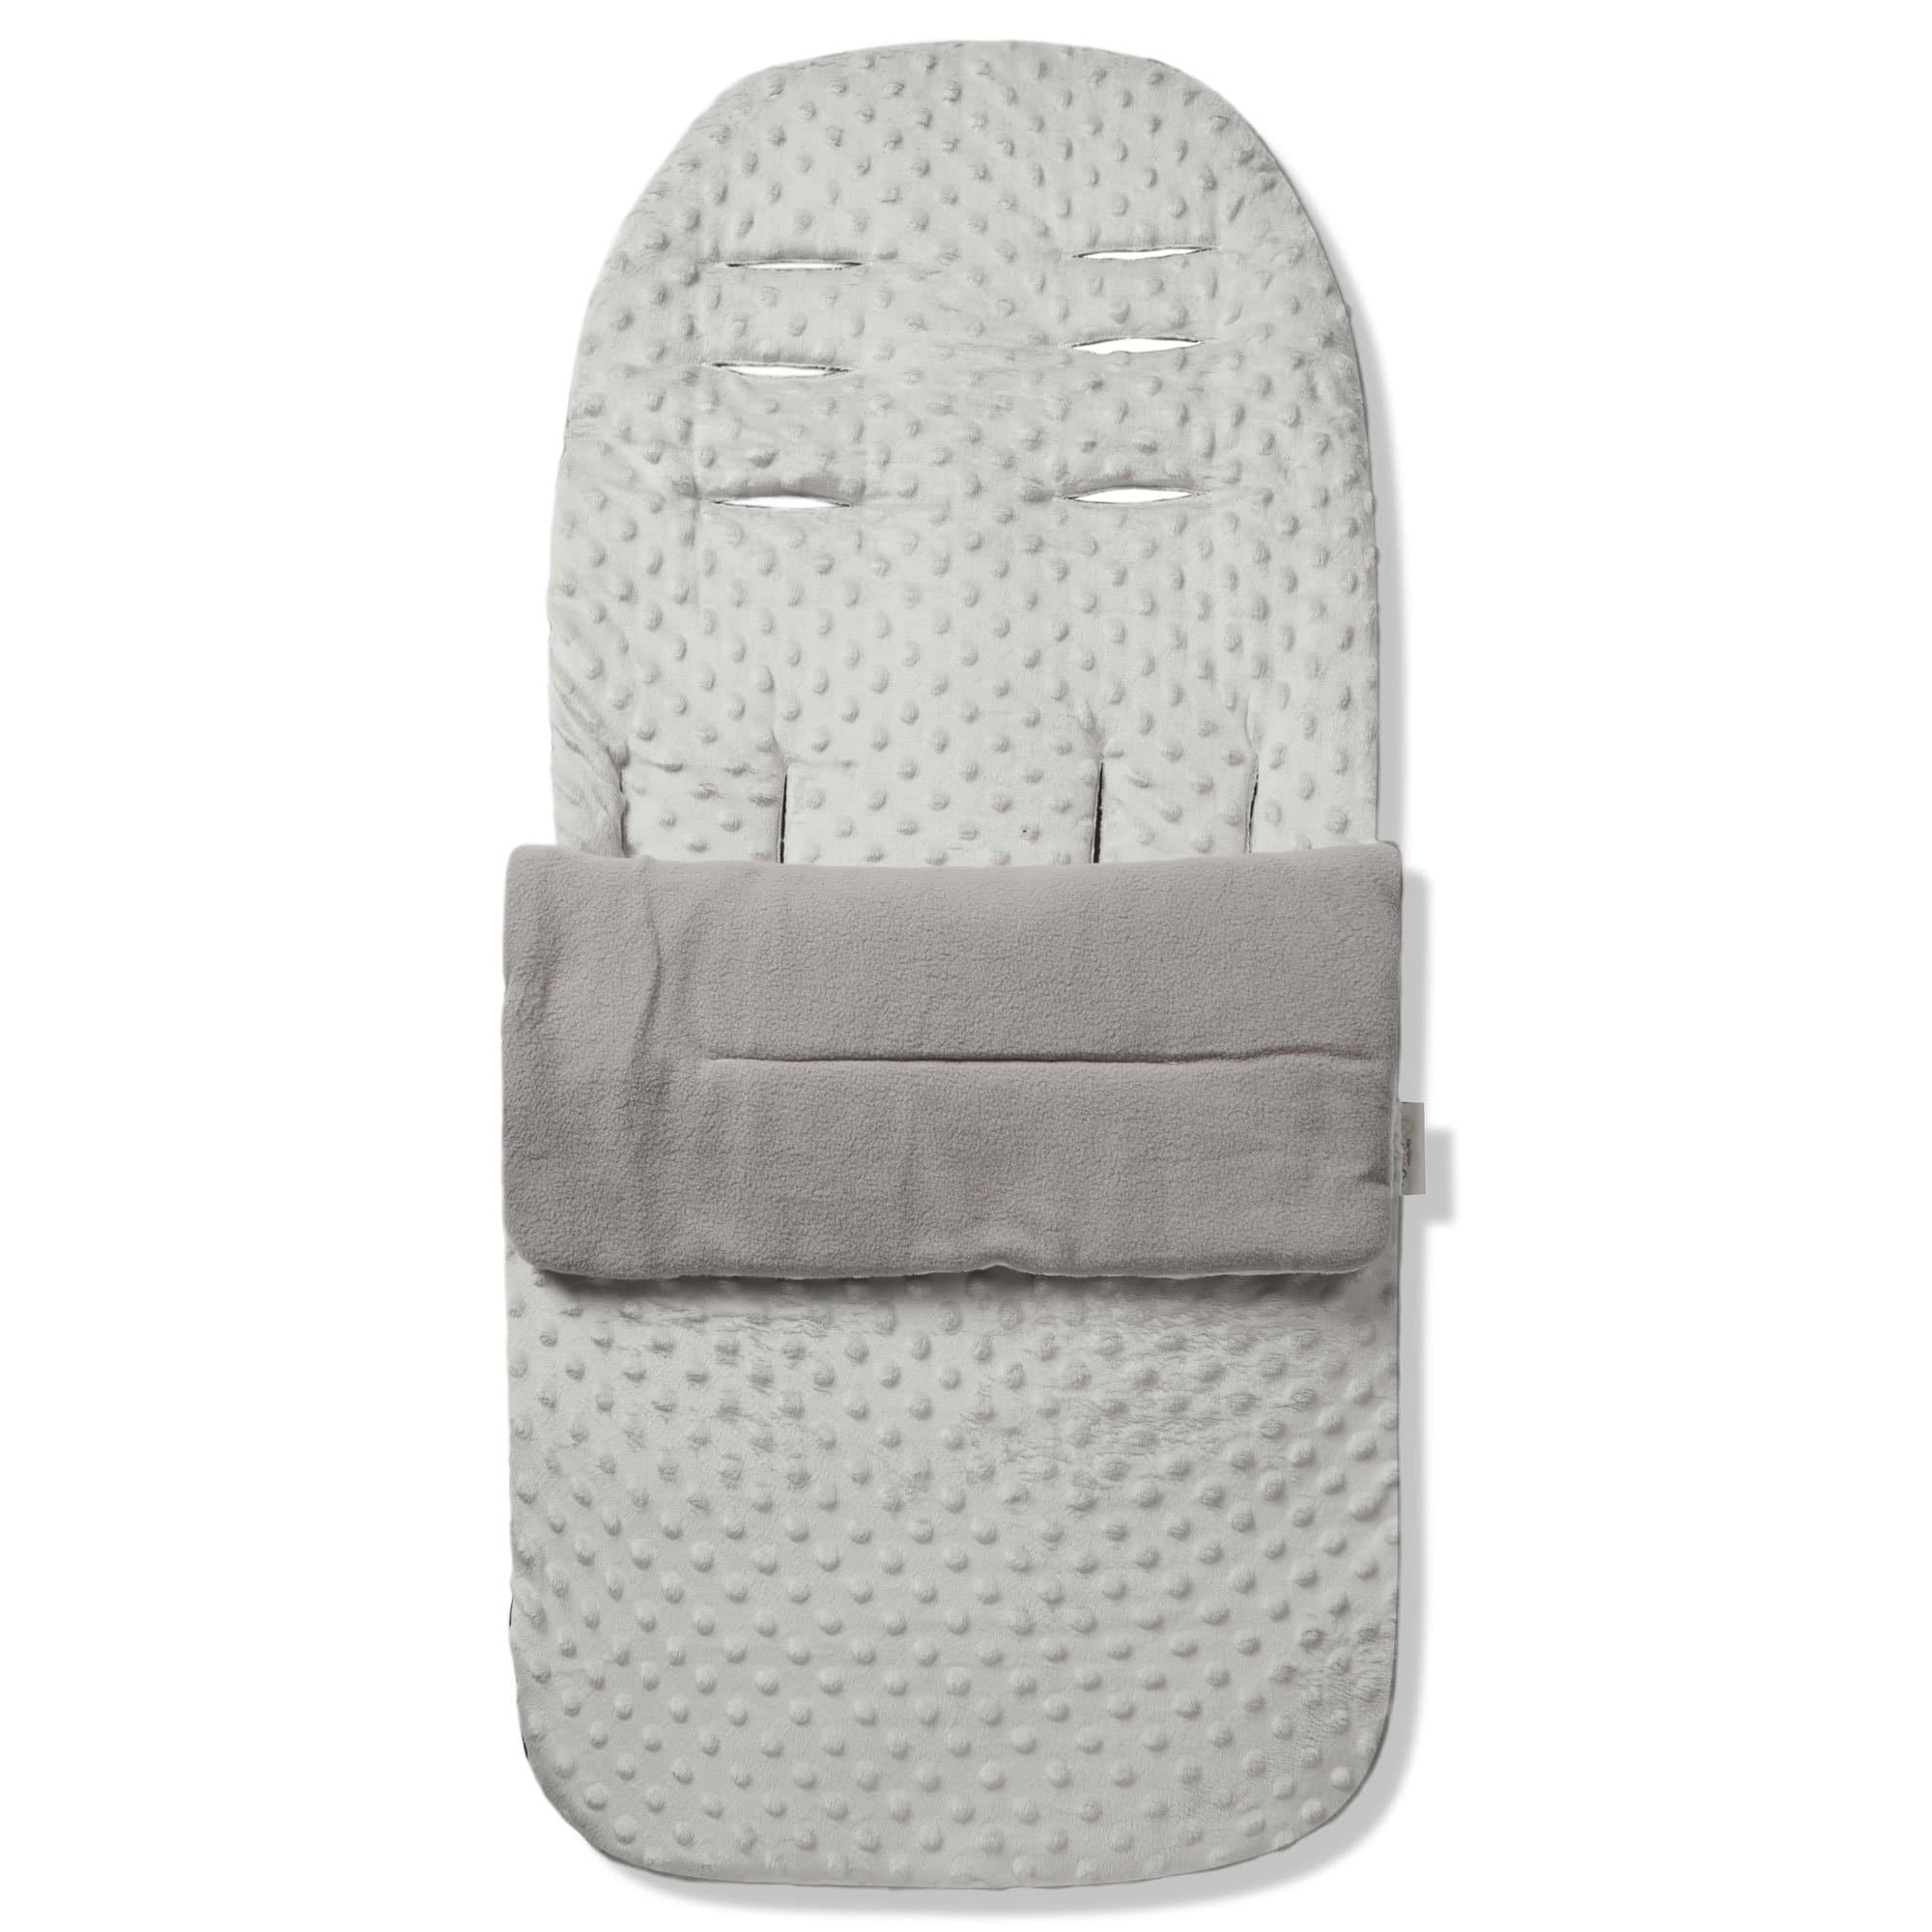 Dimple Footmuff / Cosy Toes Compatible with Esprit - Grey / Fits All Models | For Your Little One